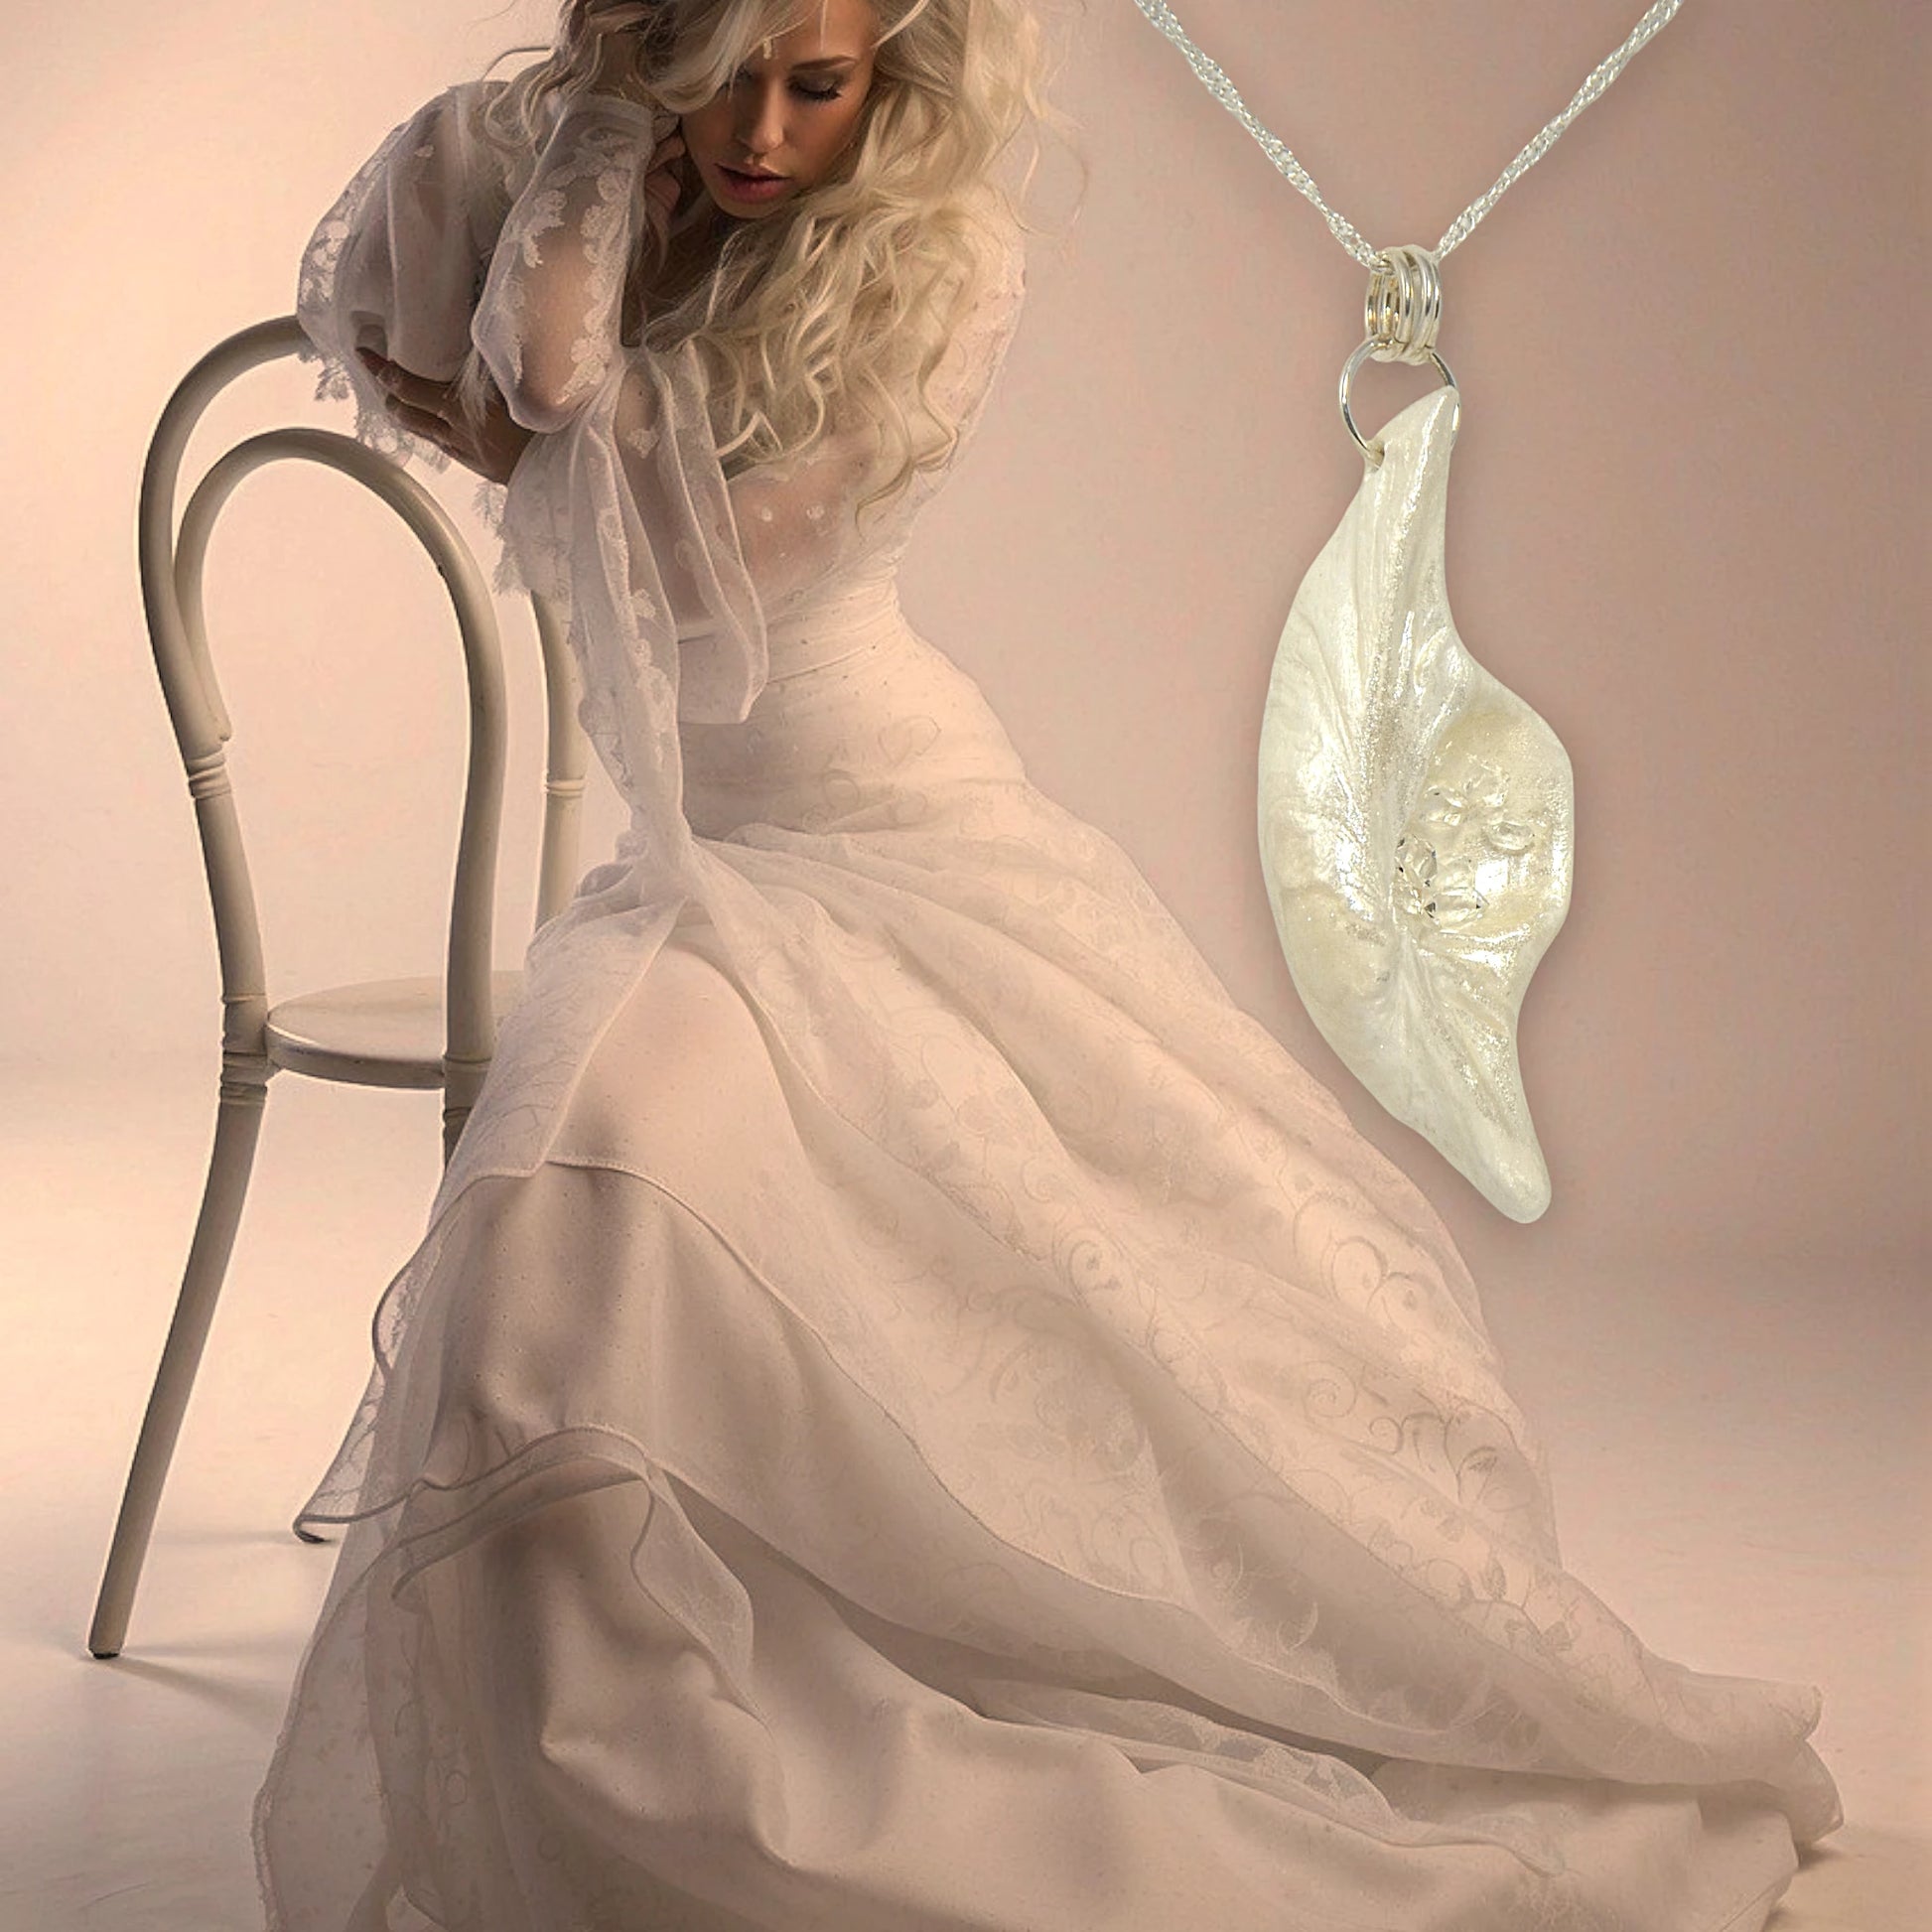 Beautiful pendant called Clarity.  Clarity is a natural seashell from the beach of Vancouver island.with seven herkimer diamonds. The pendant is shown hanging from a chain on the right side of the image.  On the left side is a woman wearing a long wedding gown.